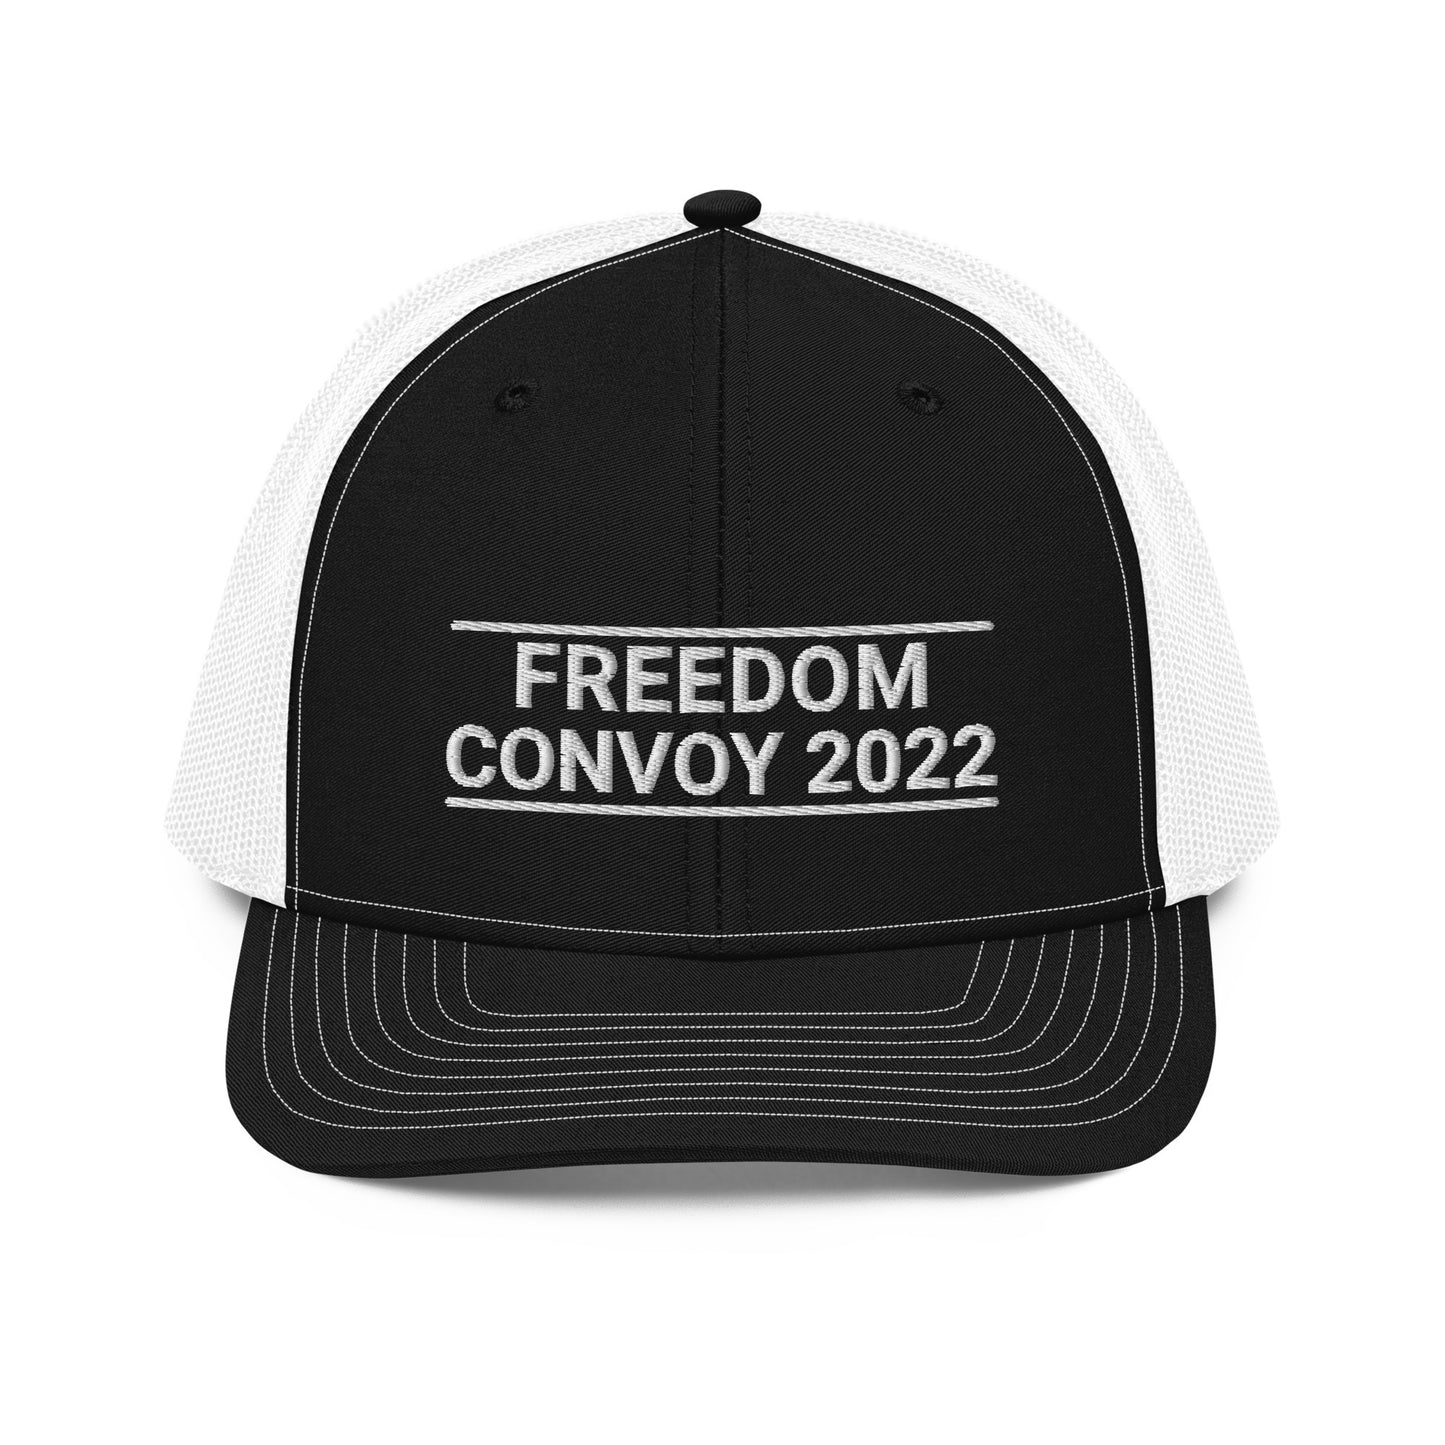 Freedom Convoy 2022 embroidered Richardson 1122 Black and white hat.